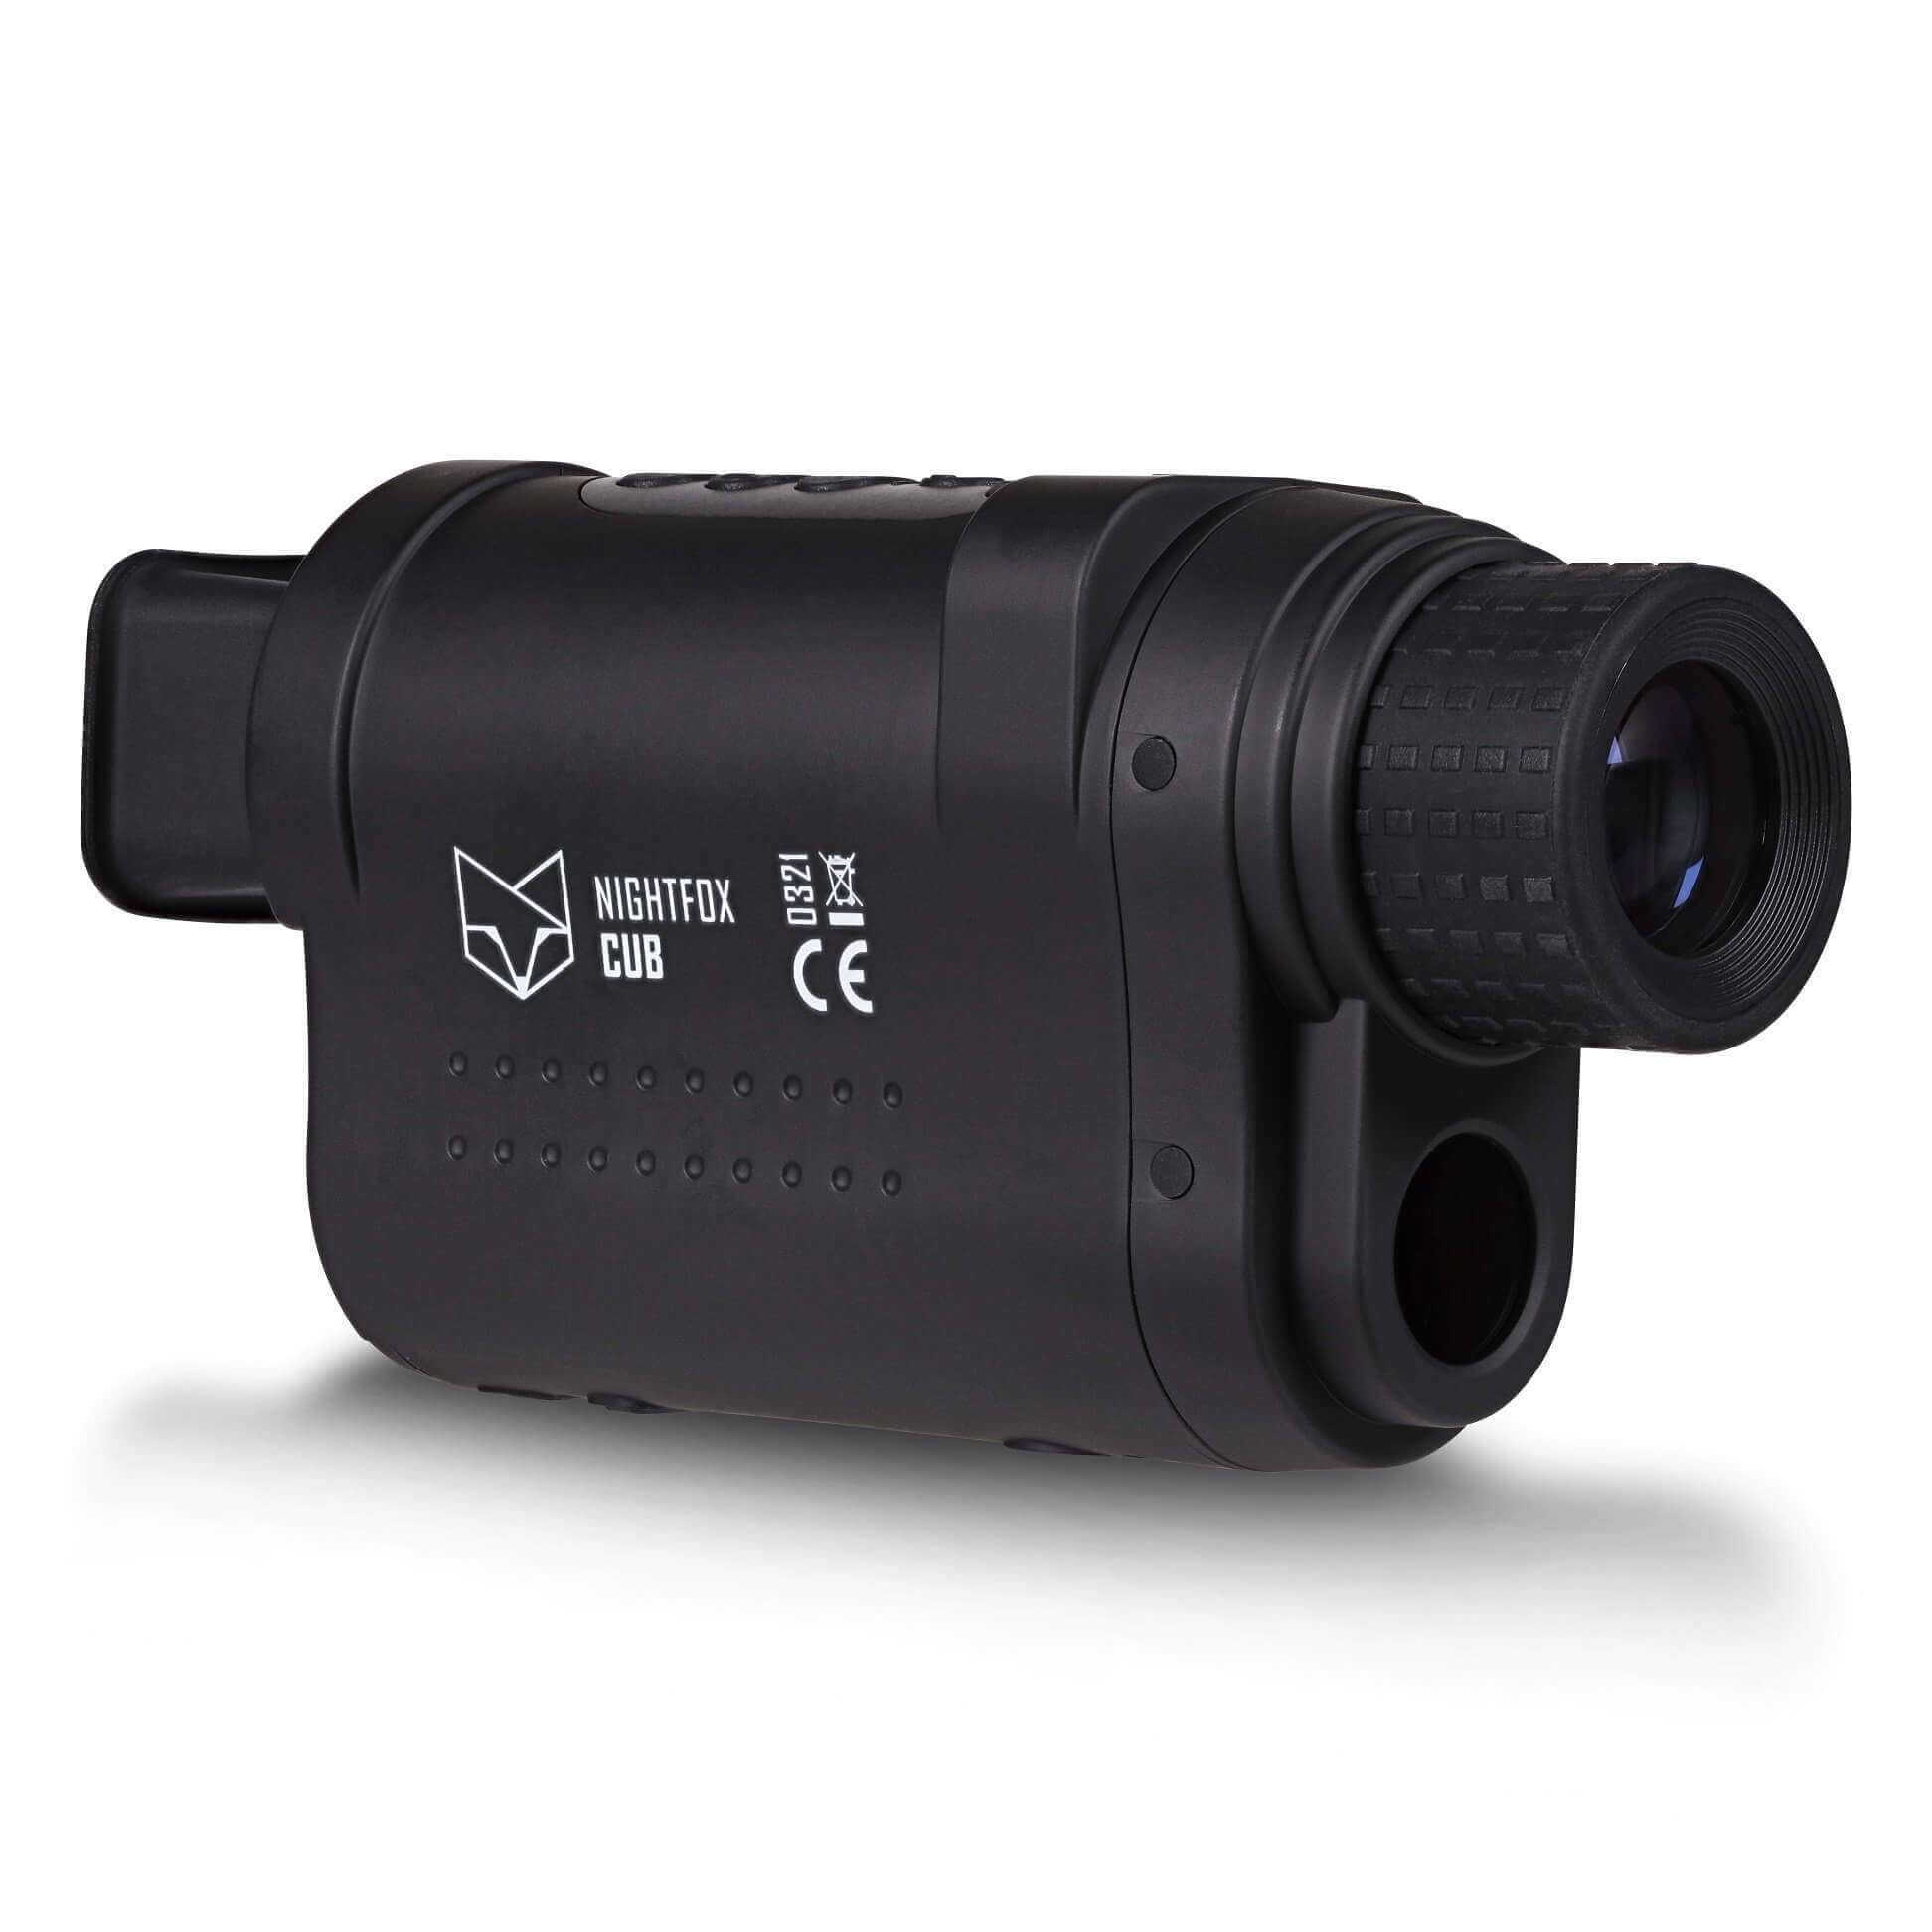 A picture of the Nightfox Cub Night Vision Monocular